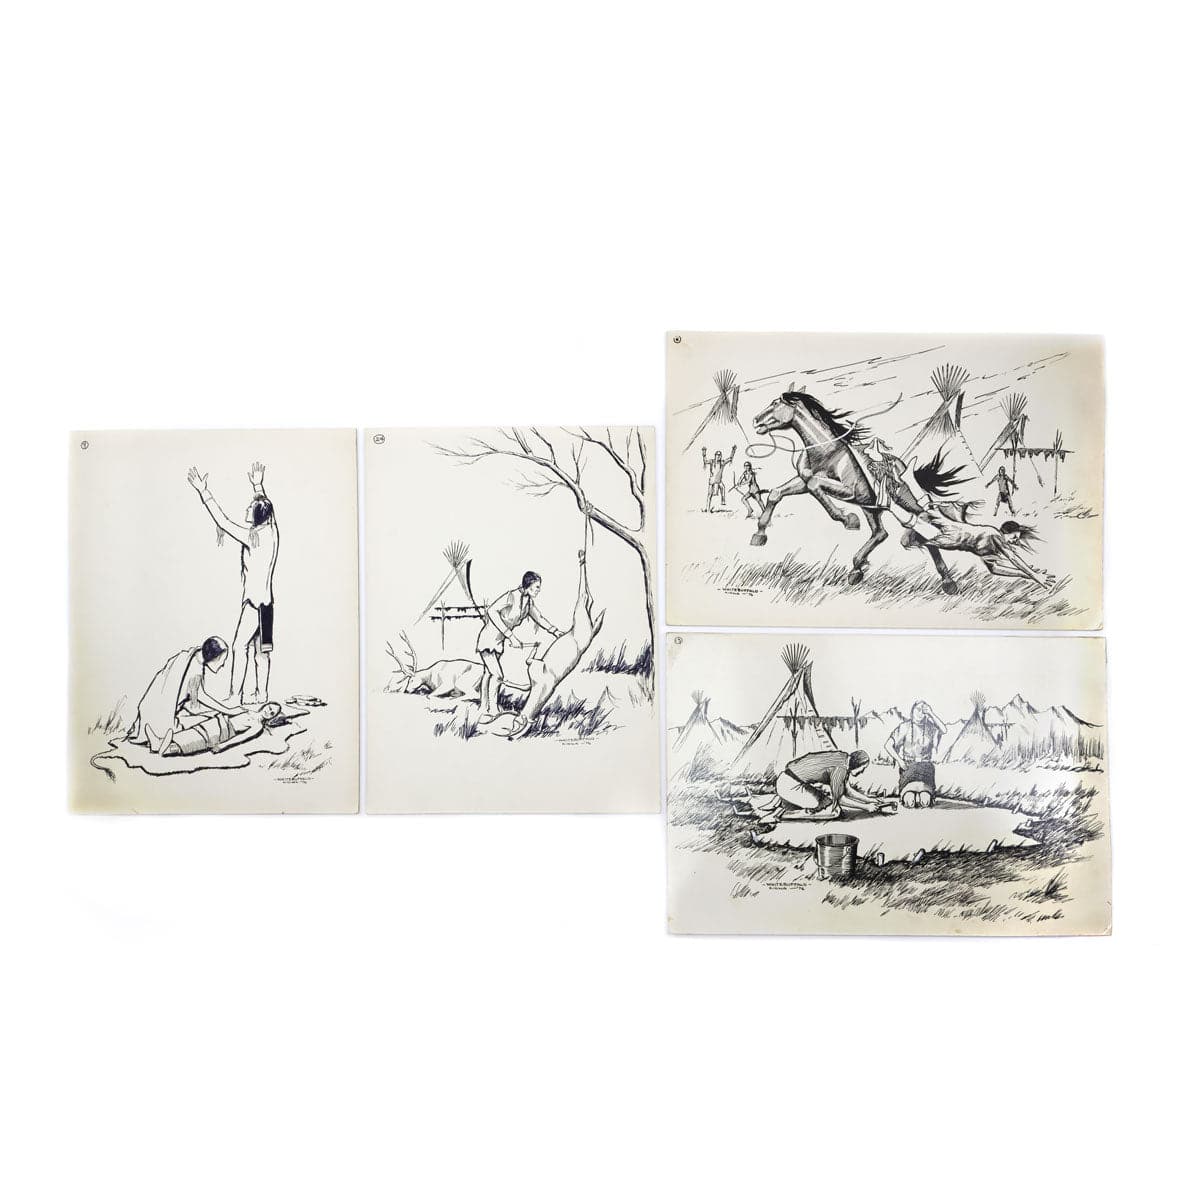 Group of 56 Original Kiowa Drawings, 120 Anko Calendar Drawings, and 13 Vinyl Records of Songs Arranged and Sung by Various Singers of the Southern and Northern Plains Tribes (M90218C-0621-001)9